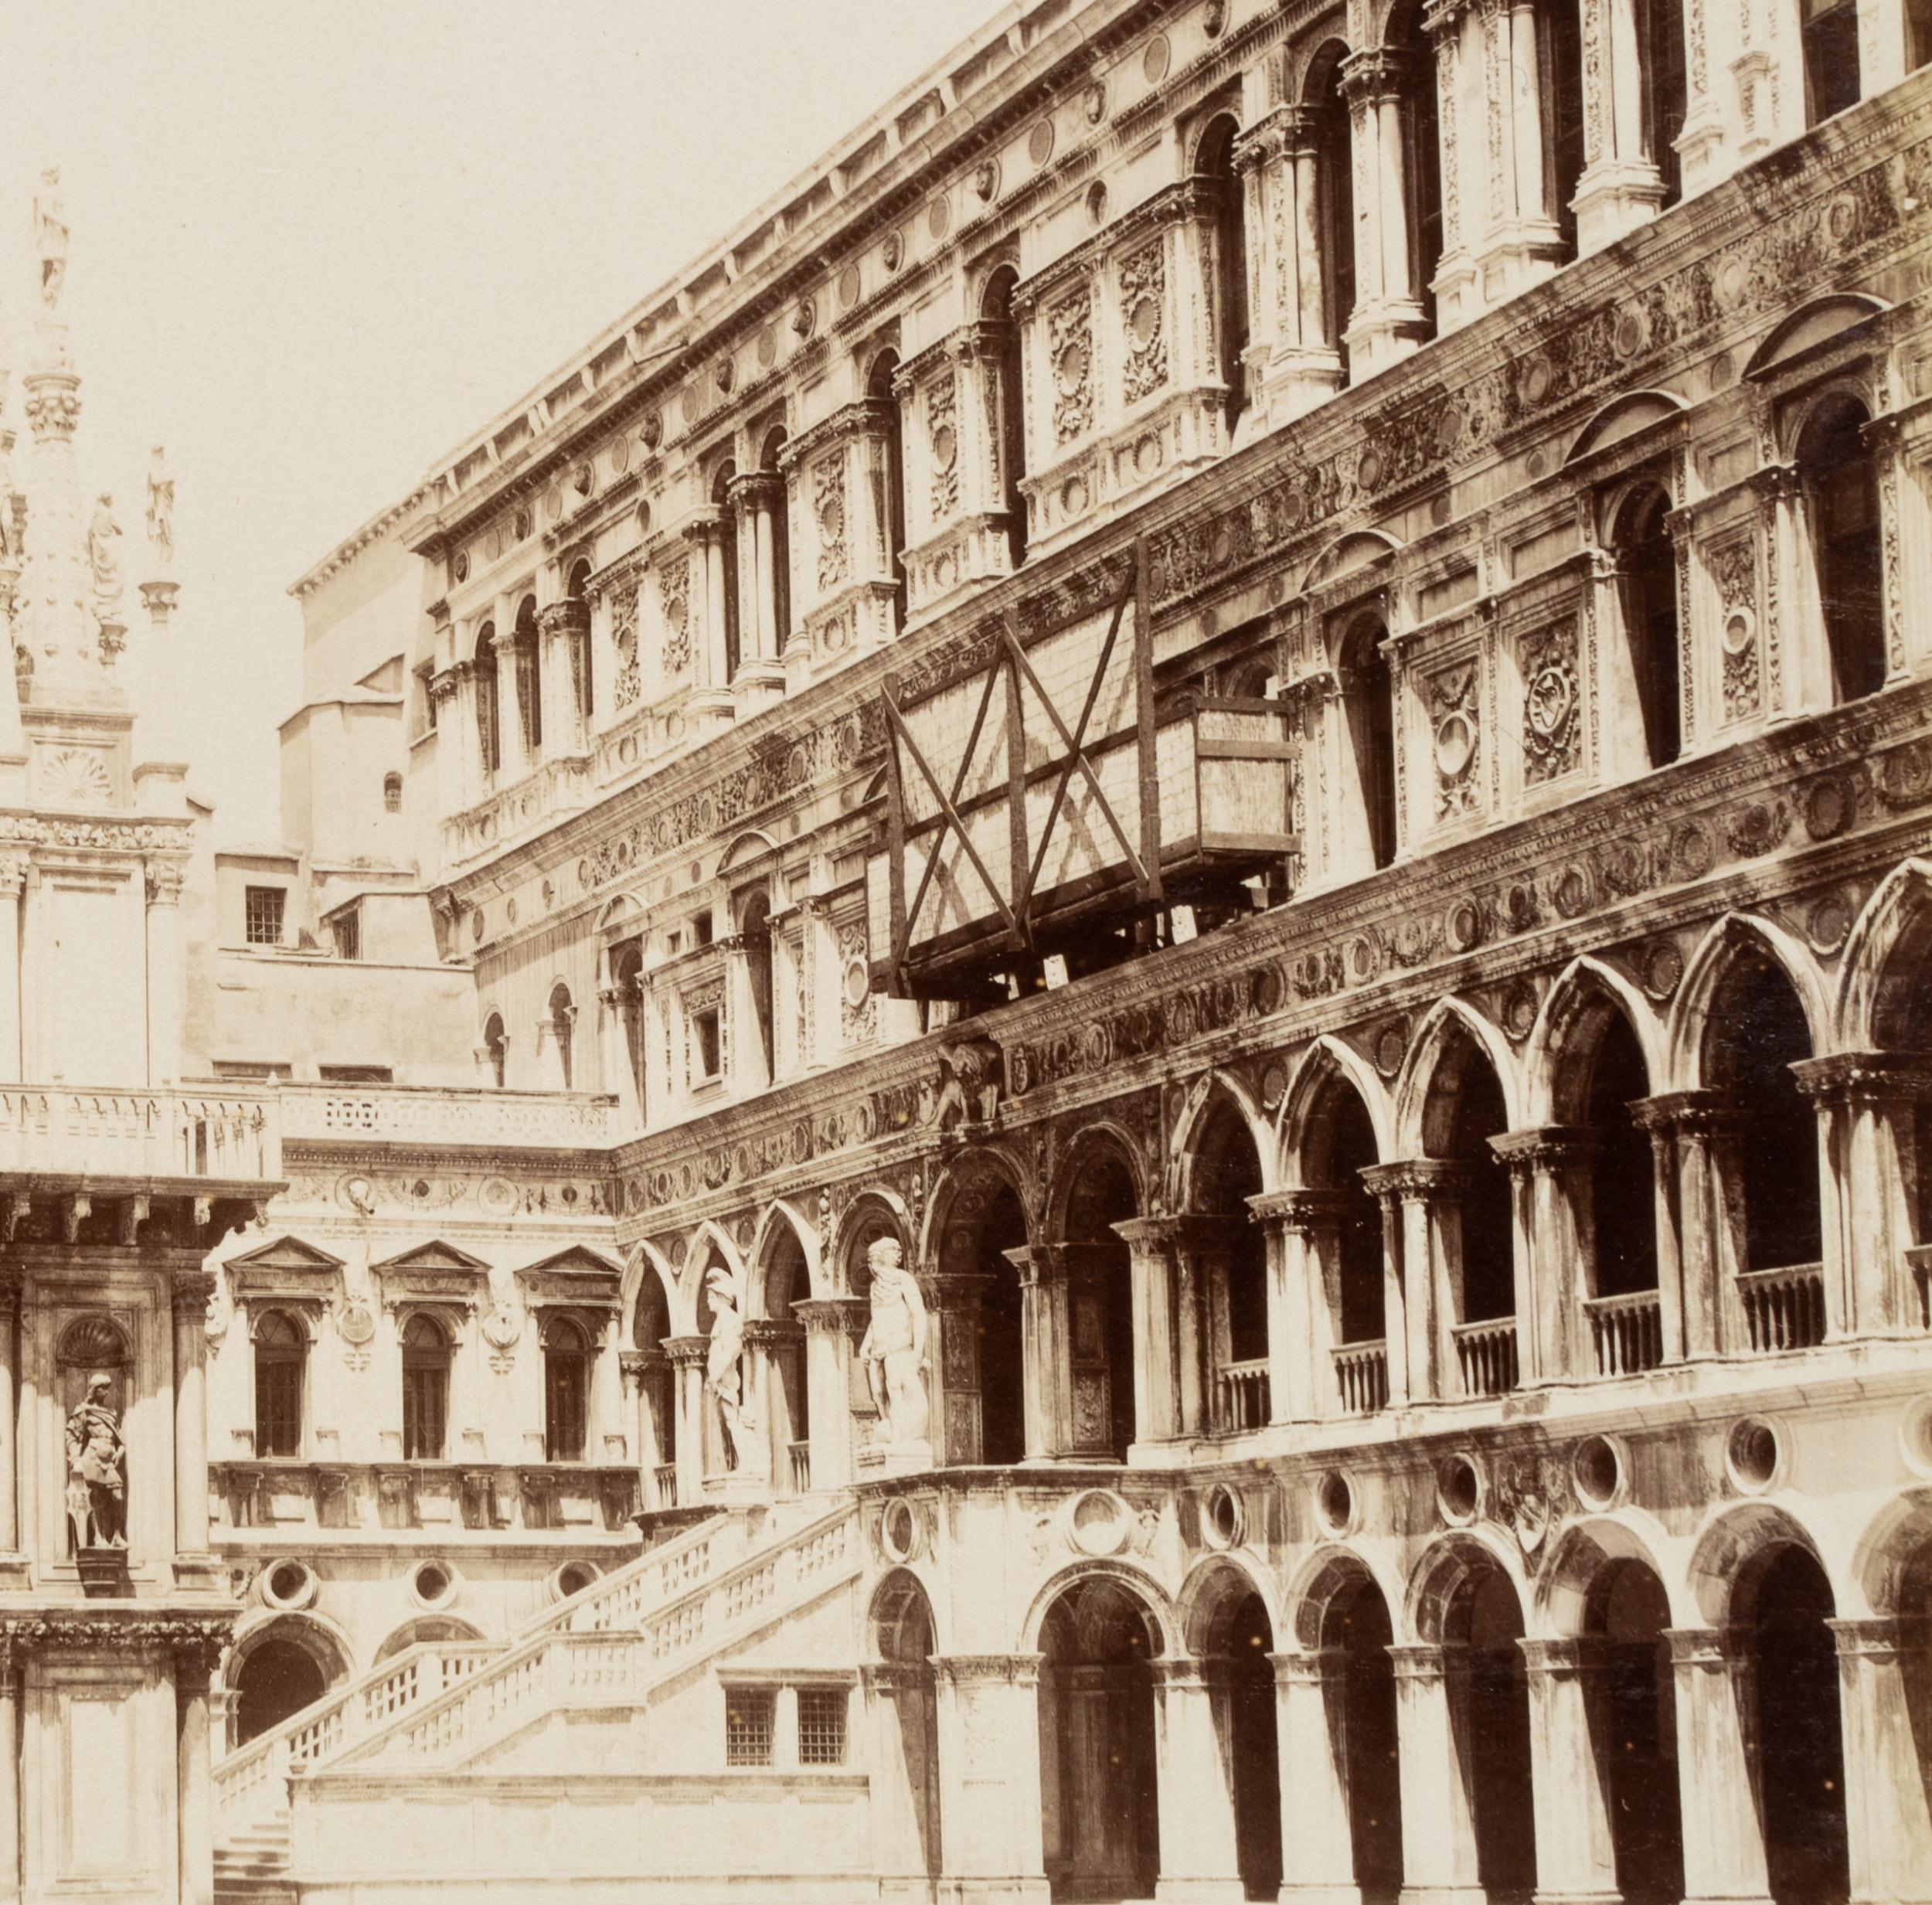 Carlo Naya (1816 Tronzano Vercellese - 1882 Venice) Circle: View of the magnificent courtyard of the Doge's Palace, Venice, c. 1880, albumen paper print

Technique: albumen paper print, mounted on Cardboard

Inscription: Lower middle inscribed on